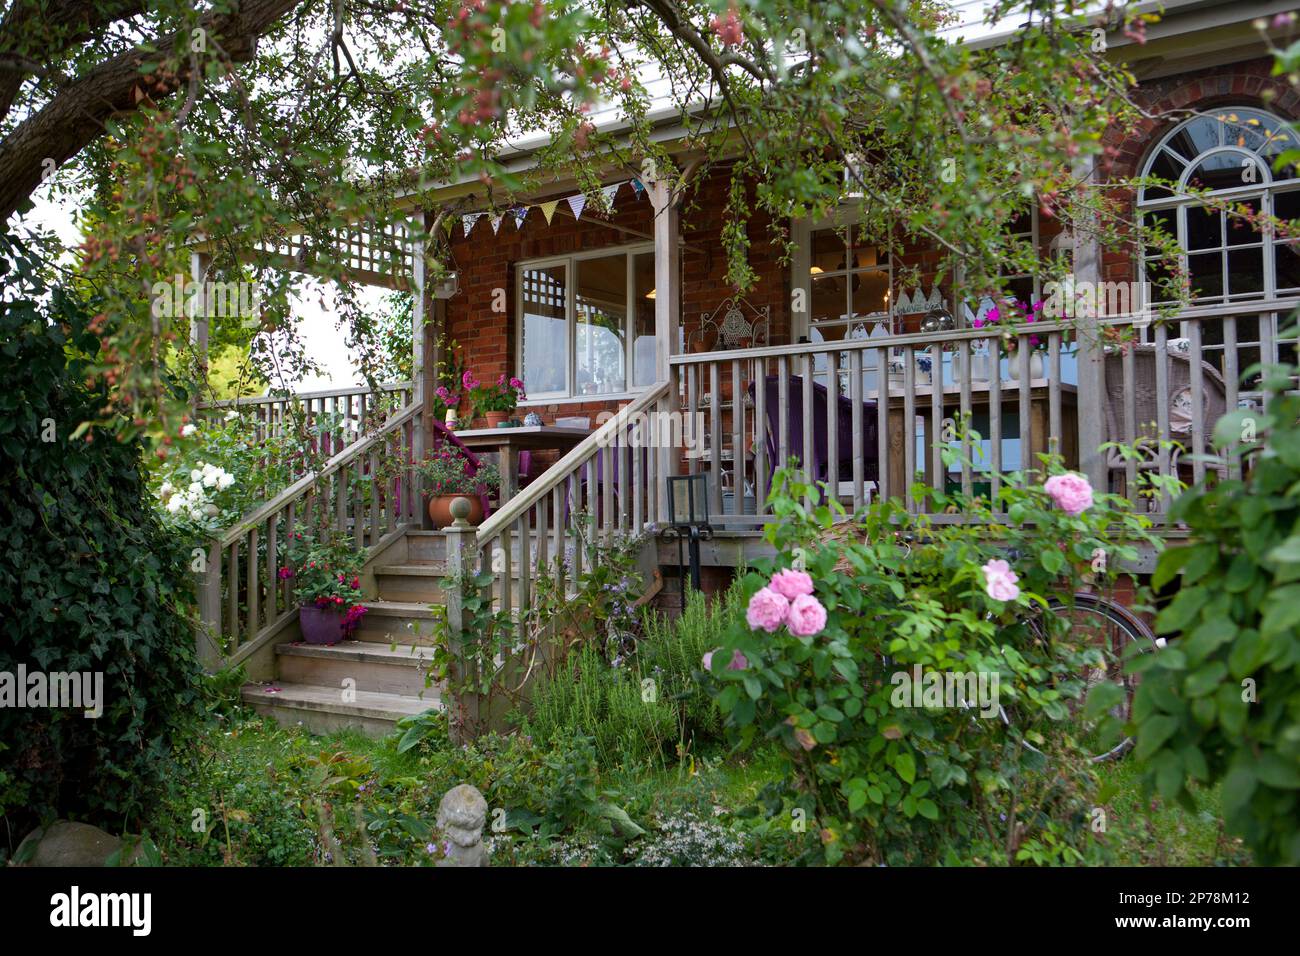 Raised wooden decking area with steps and outdoor seating, surrounded by climbing roses Stock Photo